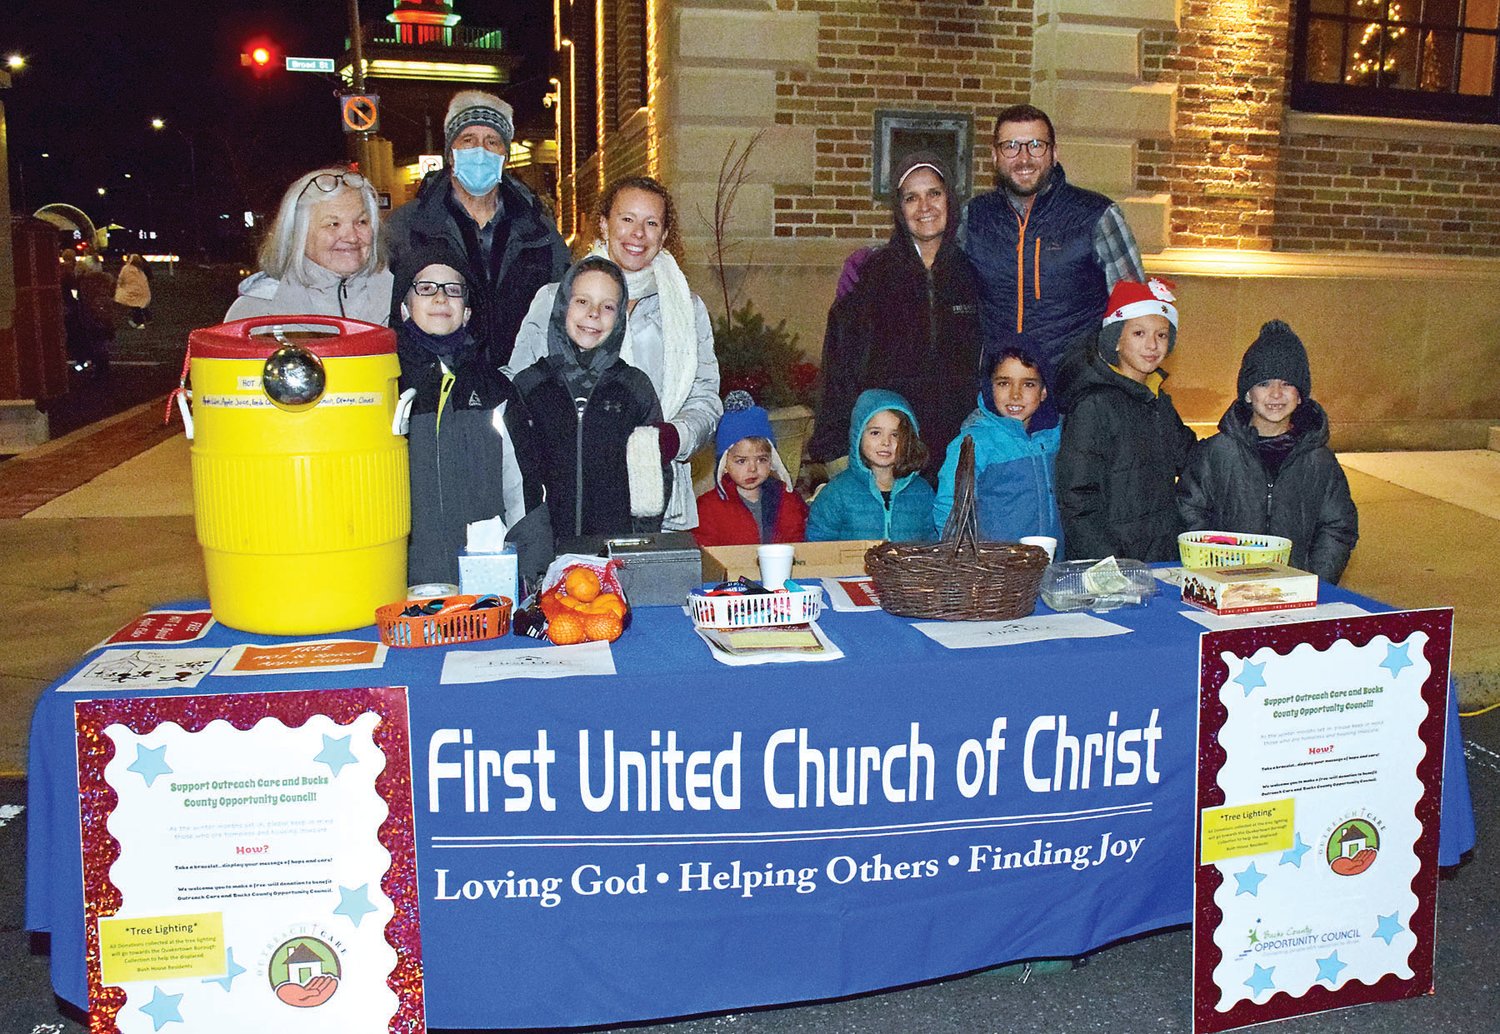 Members of First United Church of Christ.